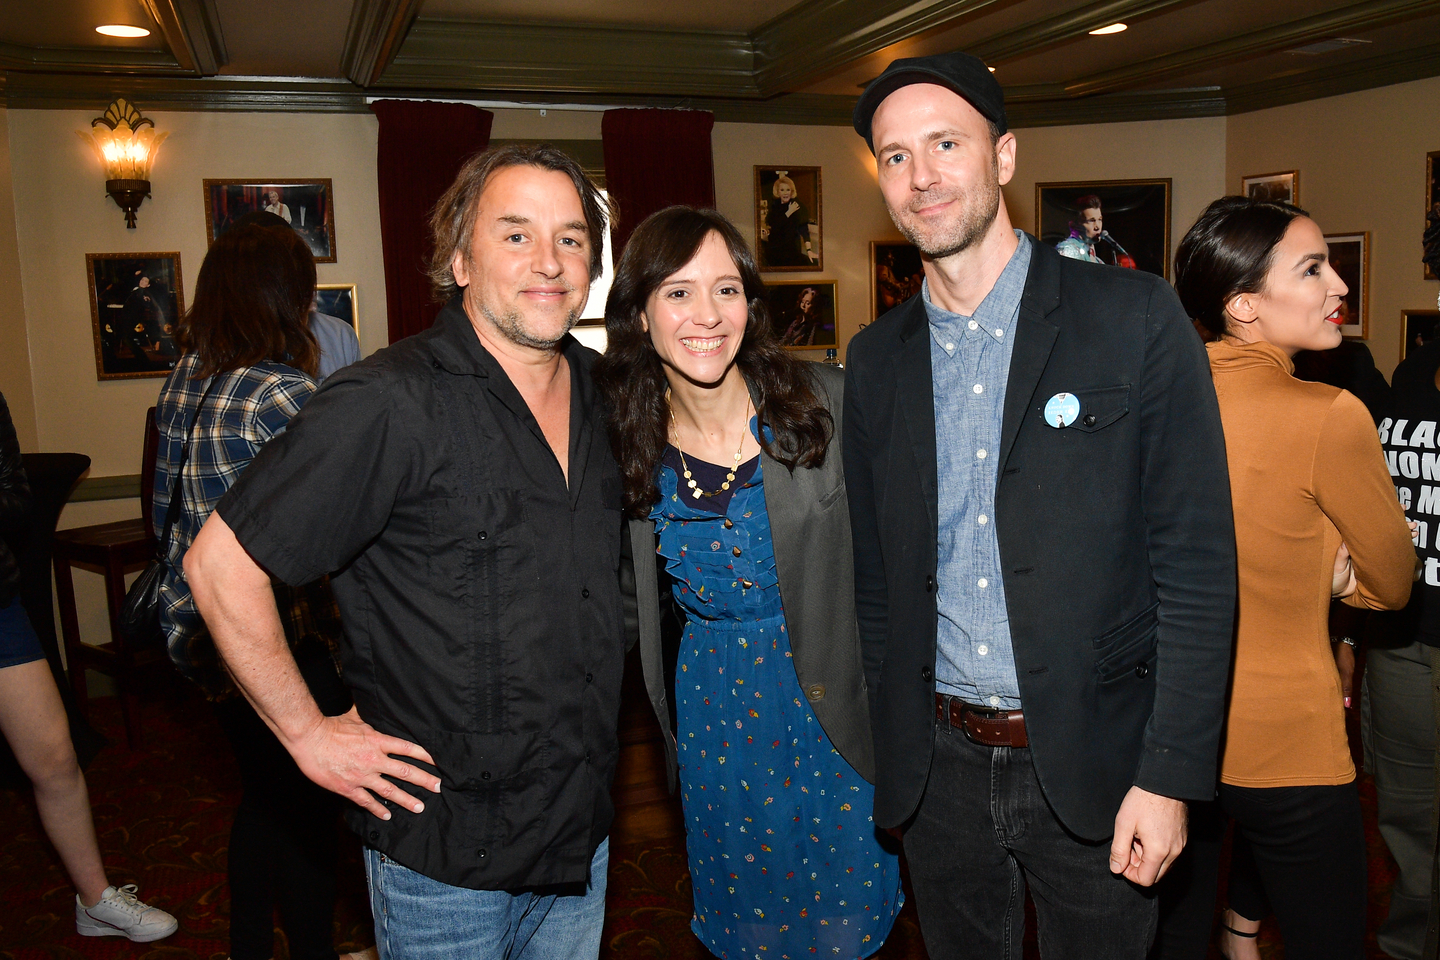 Richard Linklater, Rachel Lears, Robin Blotnickand Alexandria Ocasio-Cortez, attend the Knock Down The House Premiere at the Paramount Theatre.